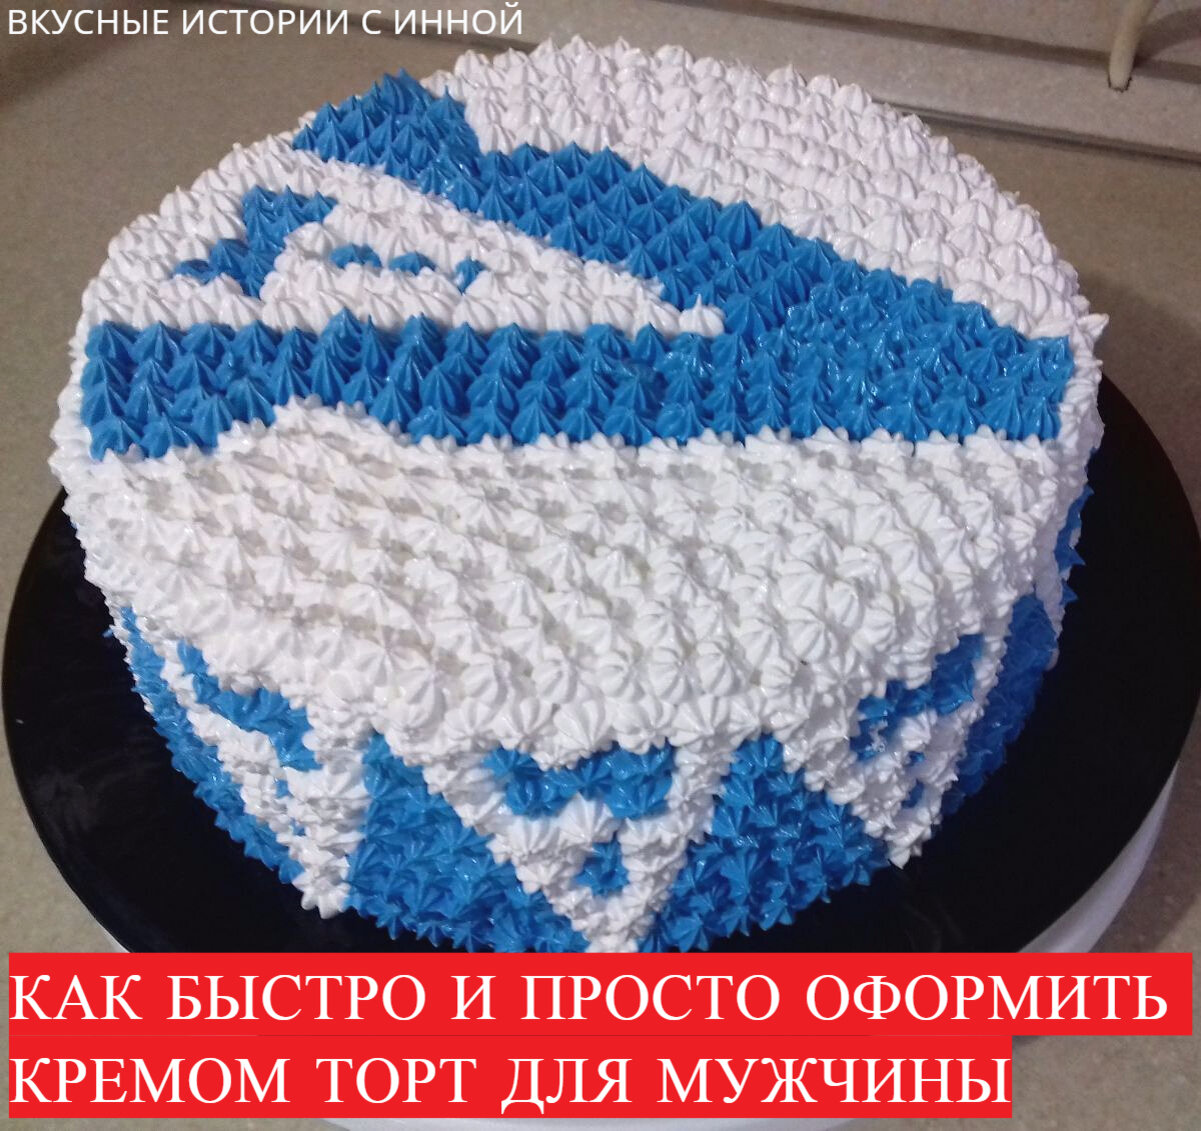 Cakes for men to order in Moscow with delivery